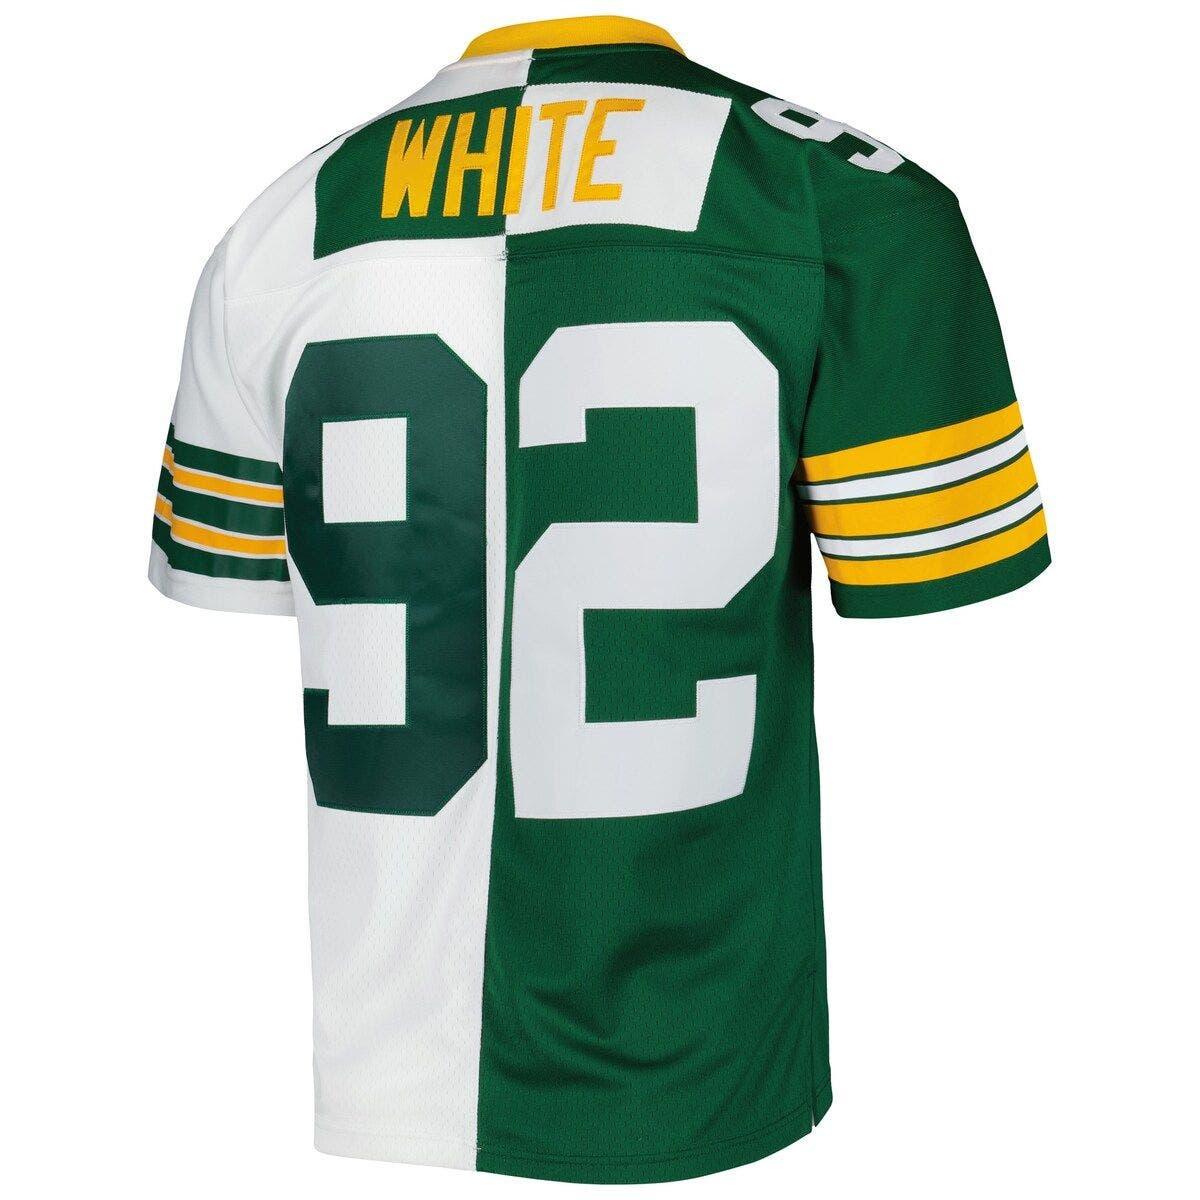 replica green bay jersey images